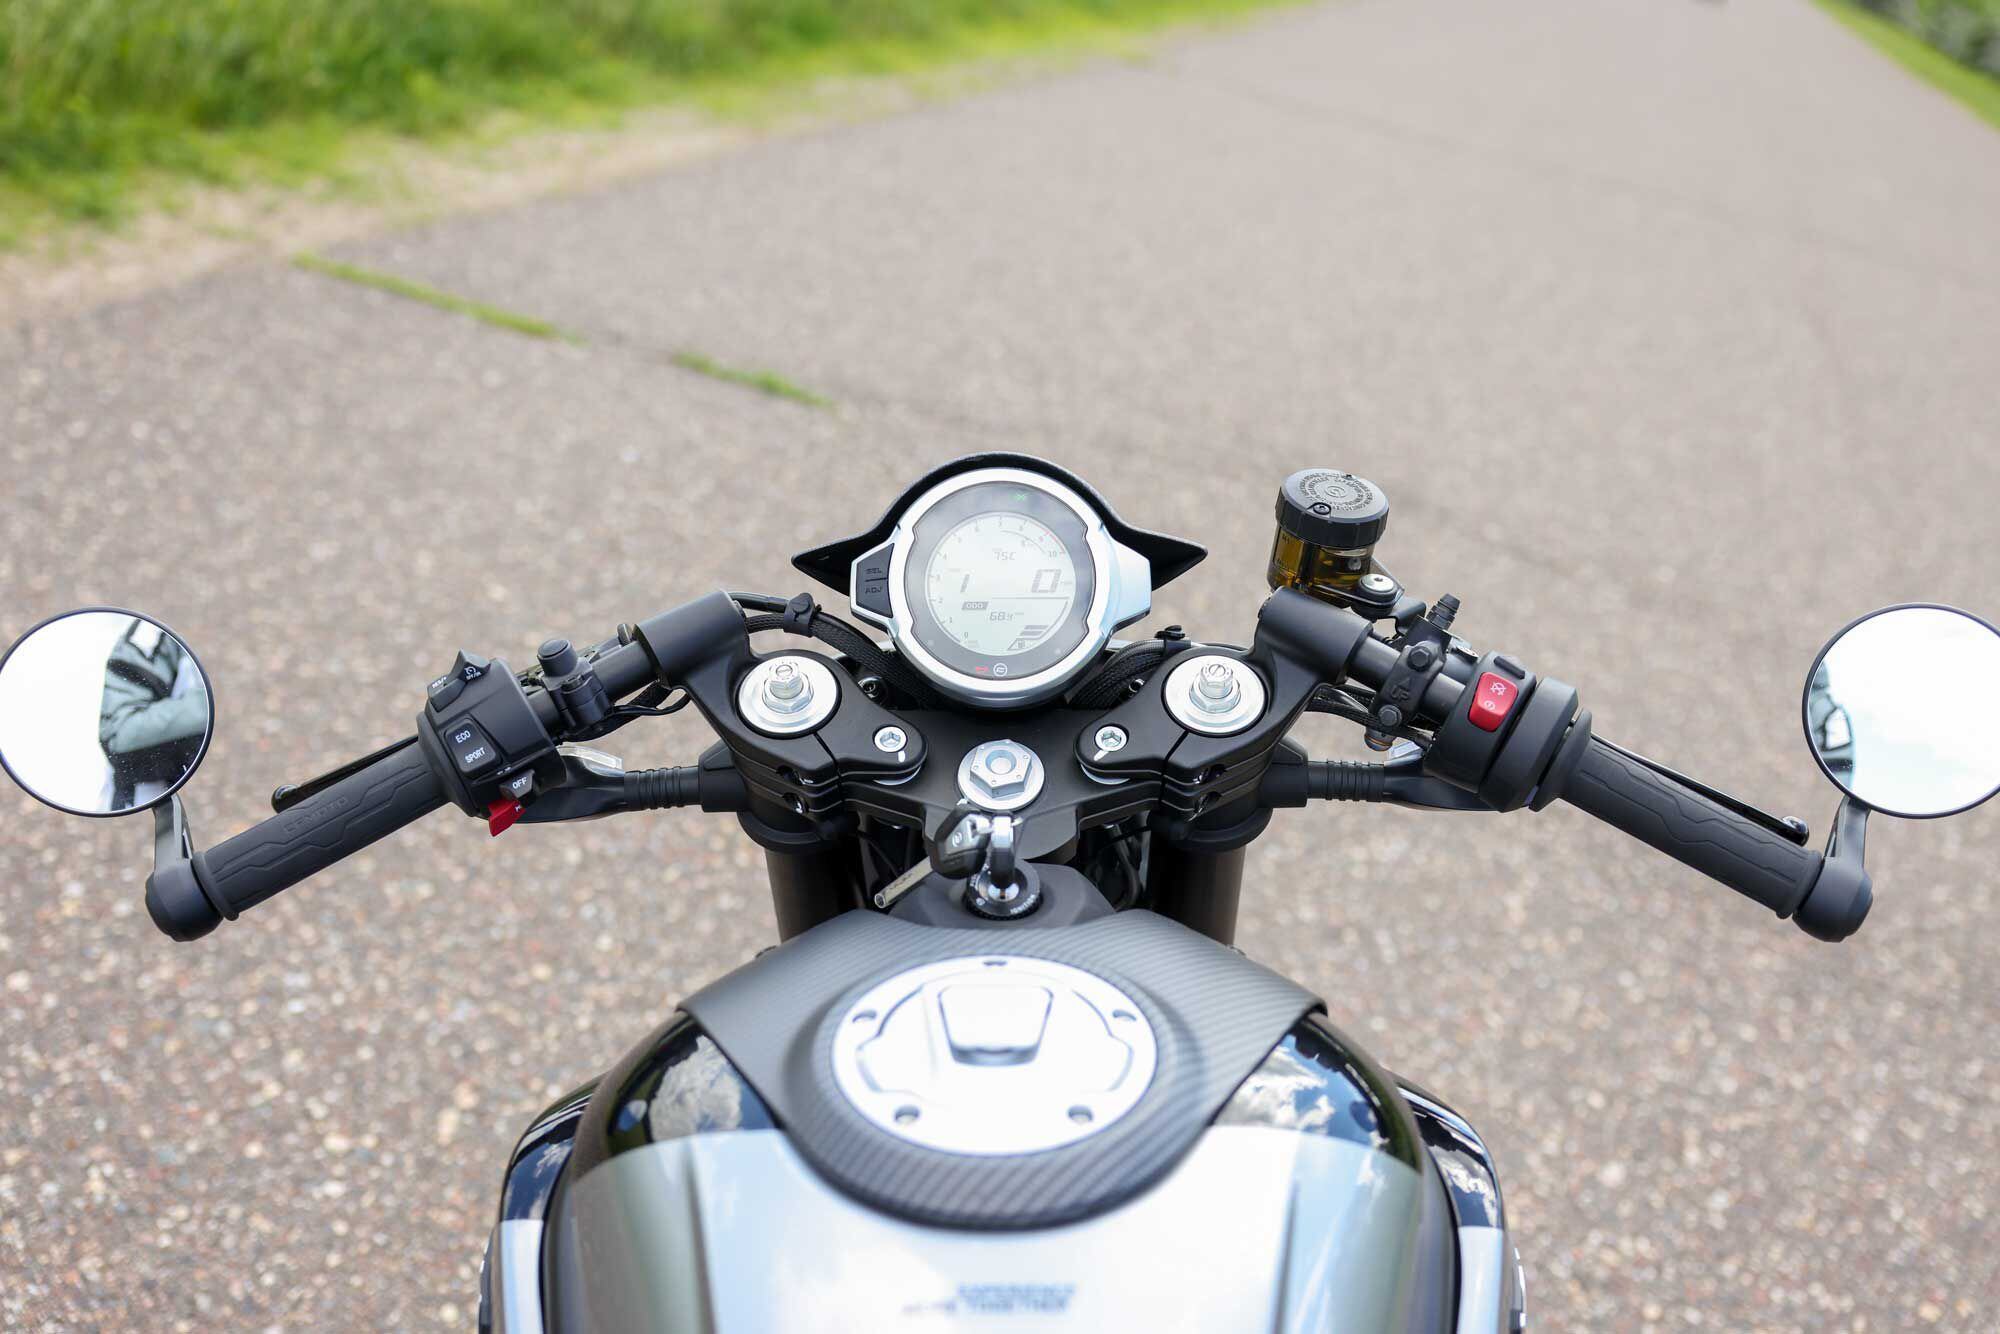 For those who like the feel and look of a café racer, the 700CL-X Sport has some attractive bars.